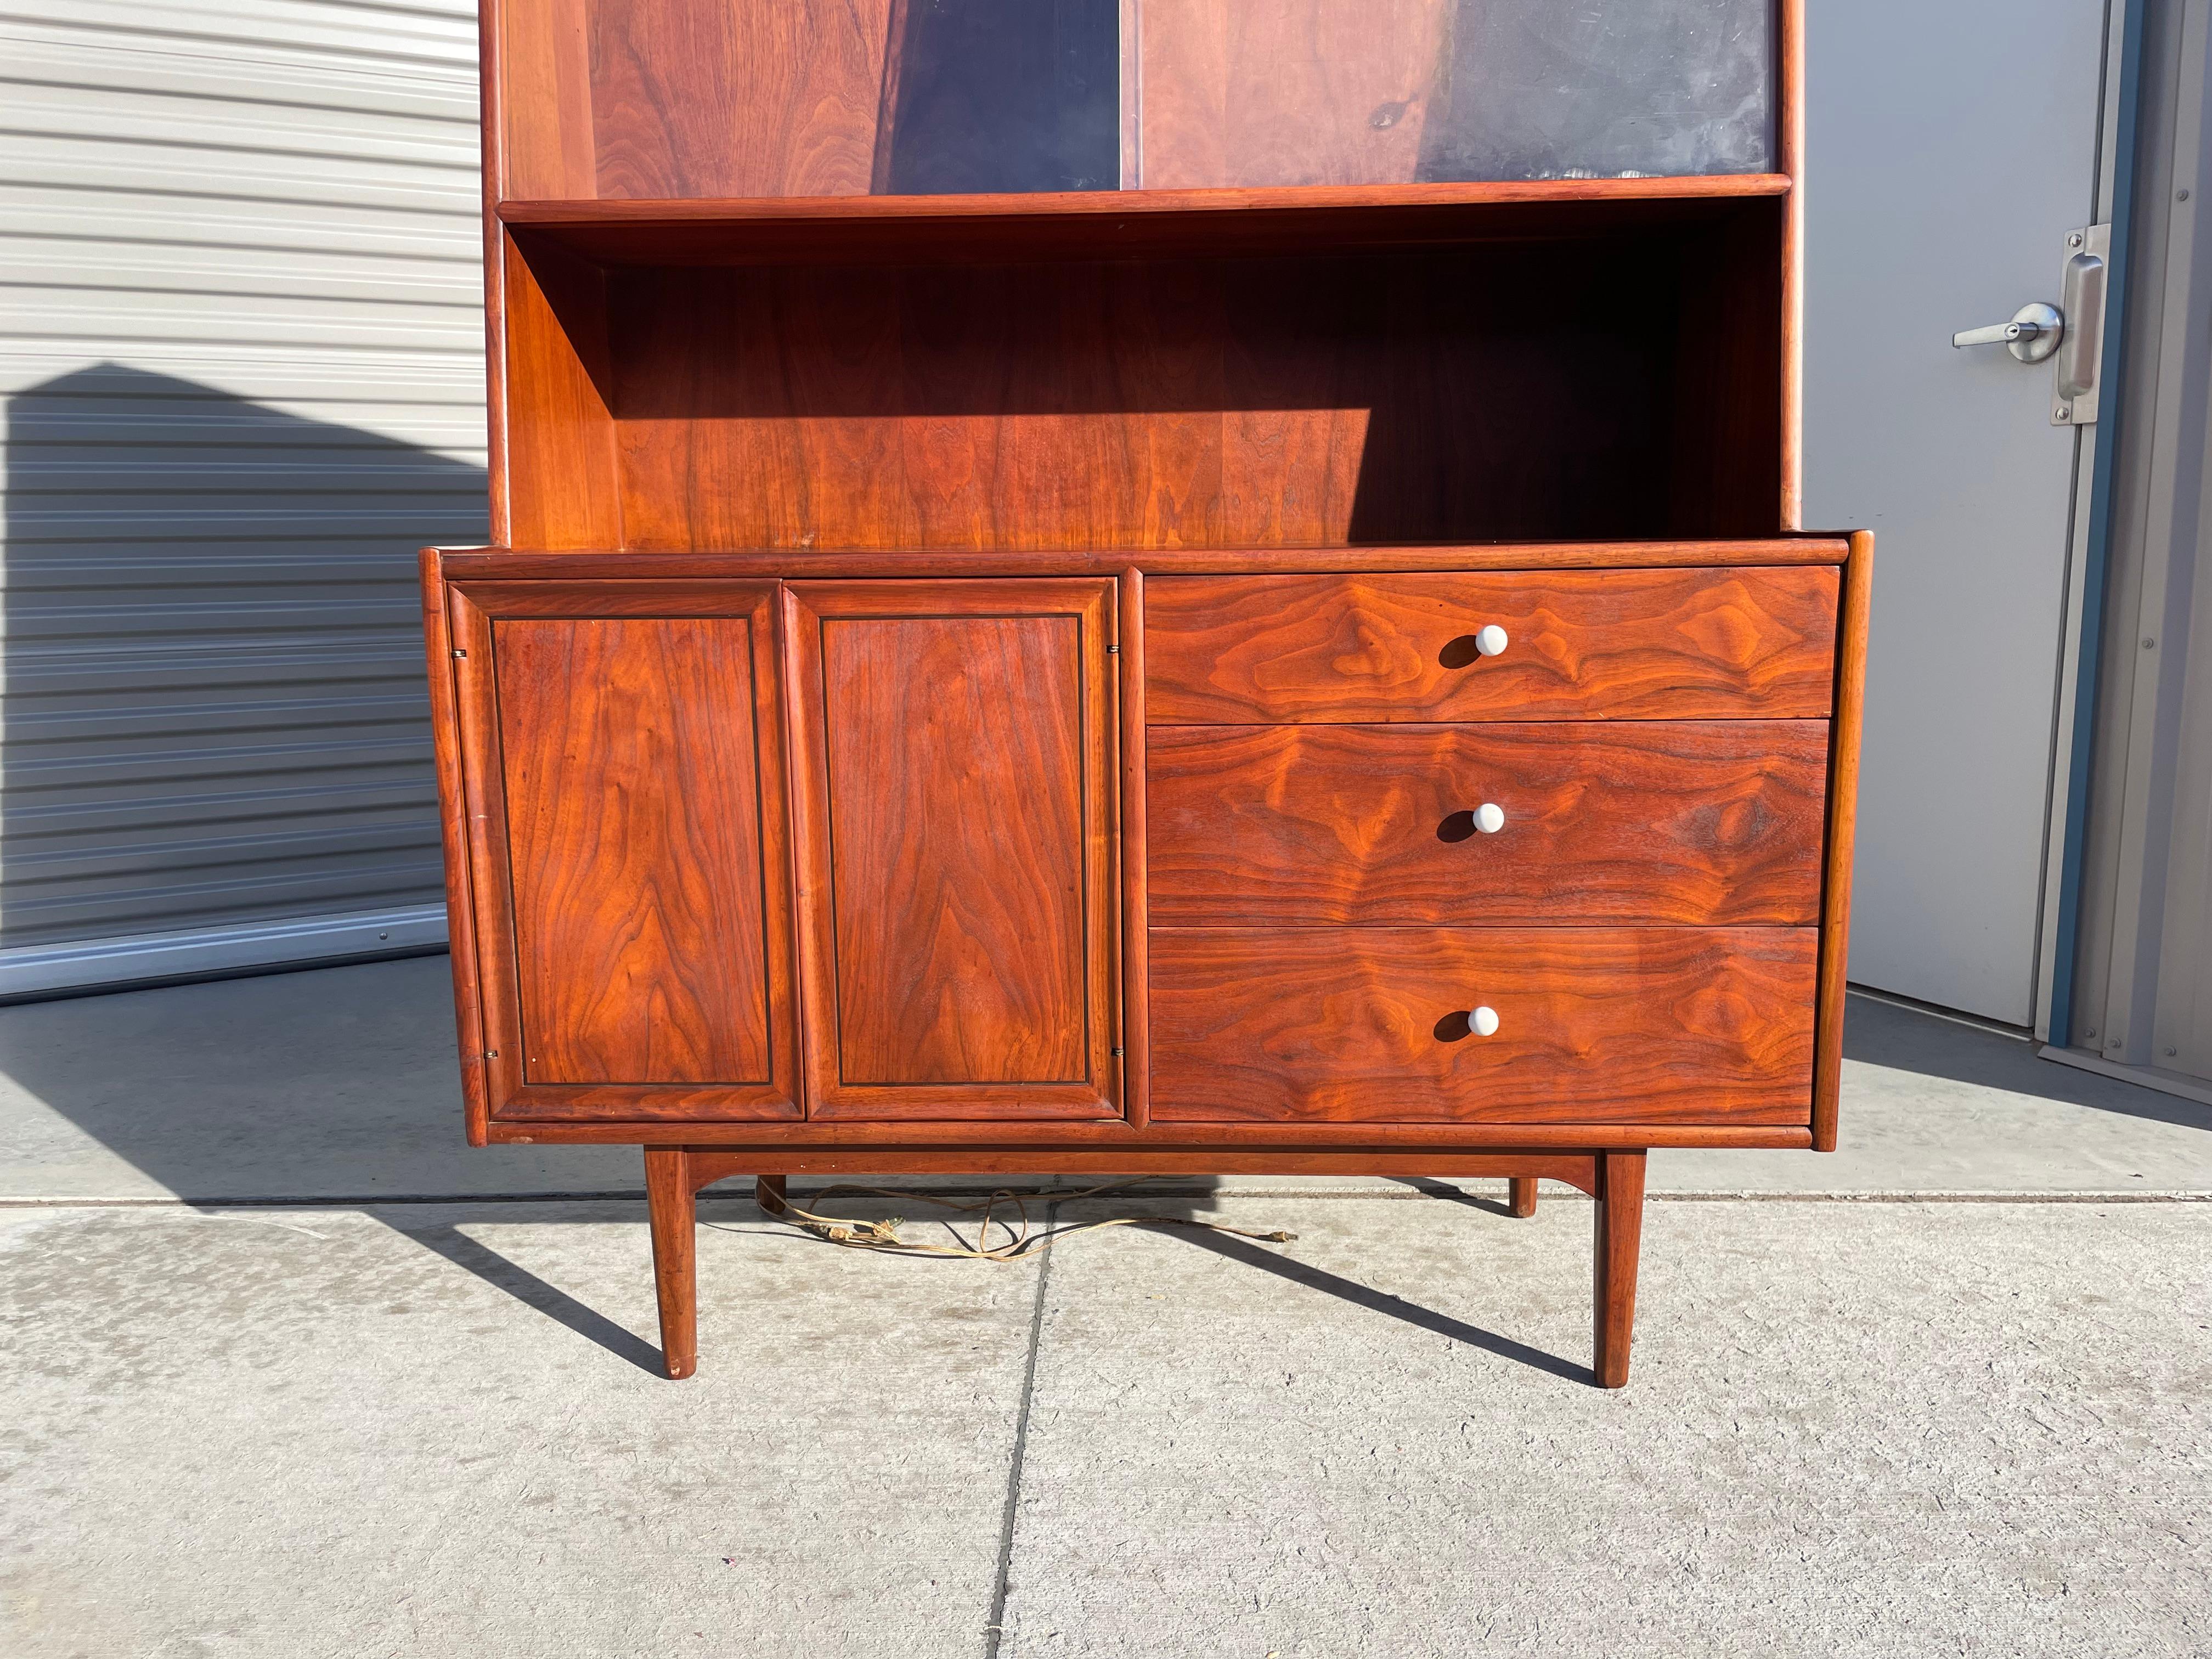 Midcentury walnut cabinet designed by Kipp Stewart for Drexel in the United States circa 1950s. This vintage cabinet features a lower section with three large storage drawers, each with Kipp Stewart signature white porcelain handles. The left side